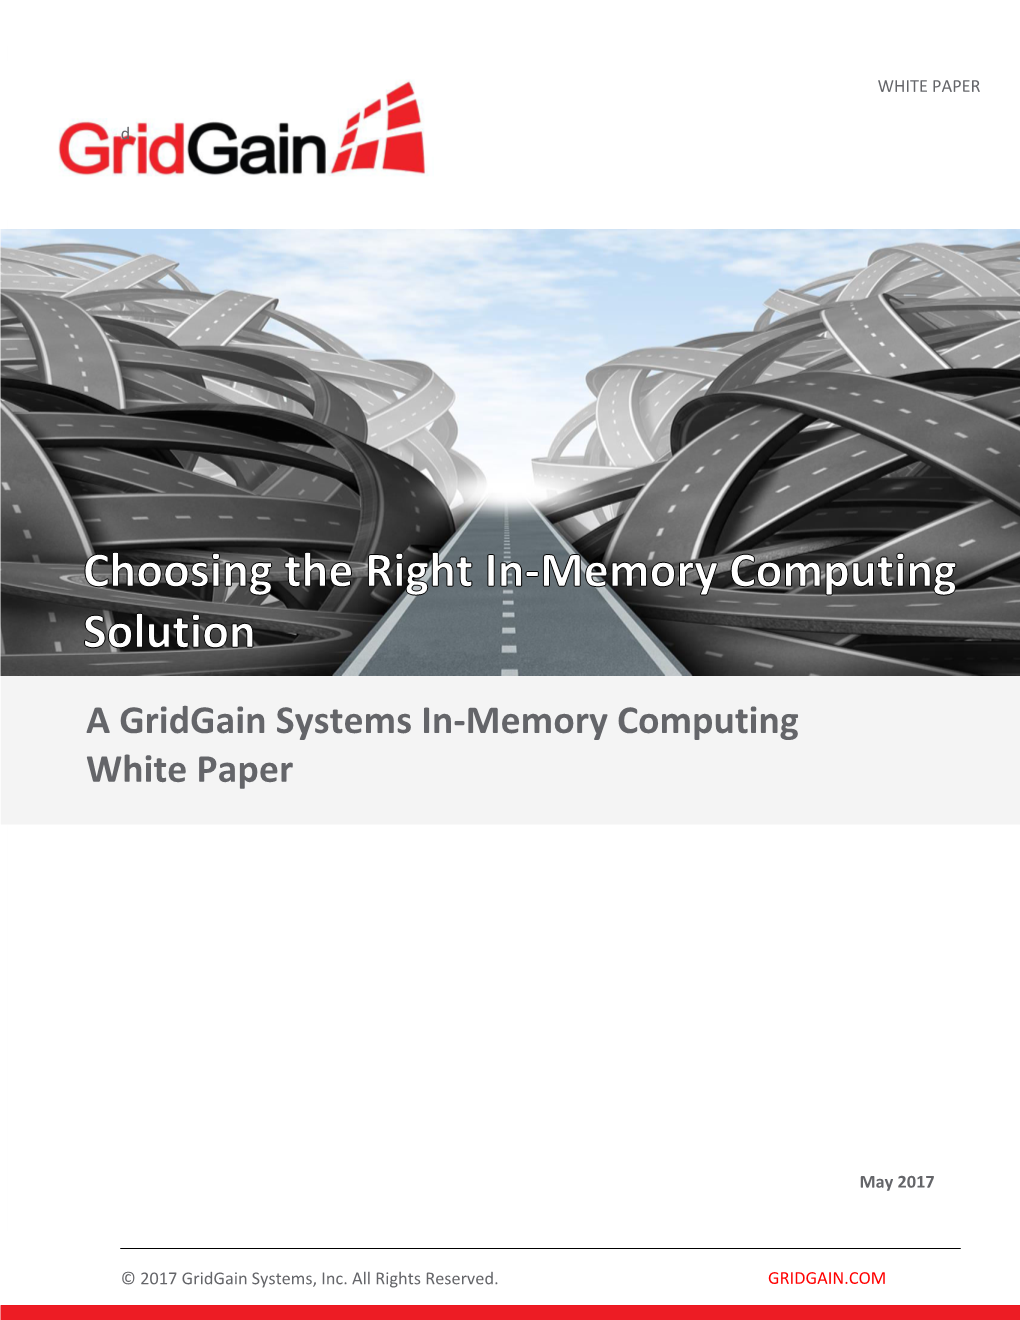 A Gridgain Systems In-Memory Computing White Paper